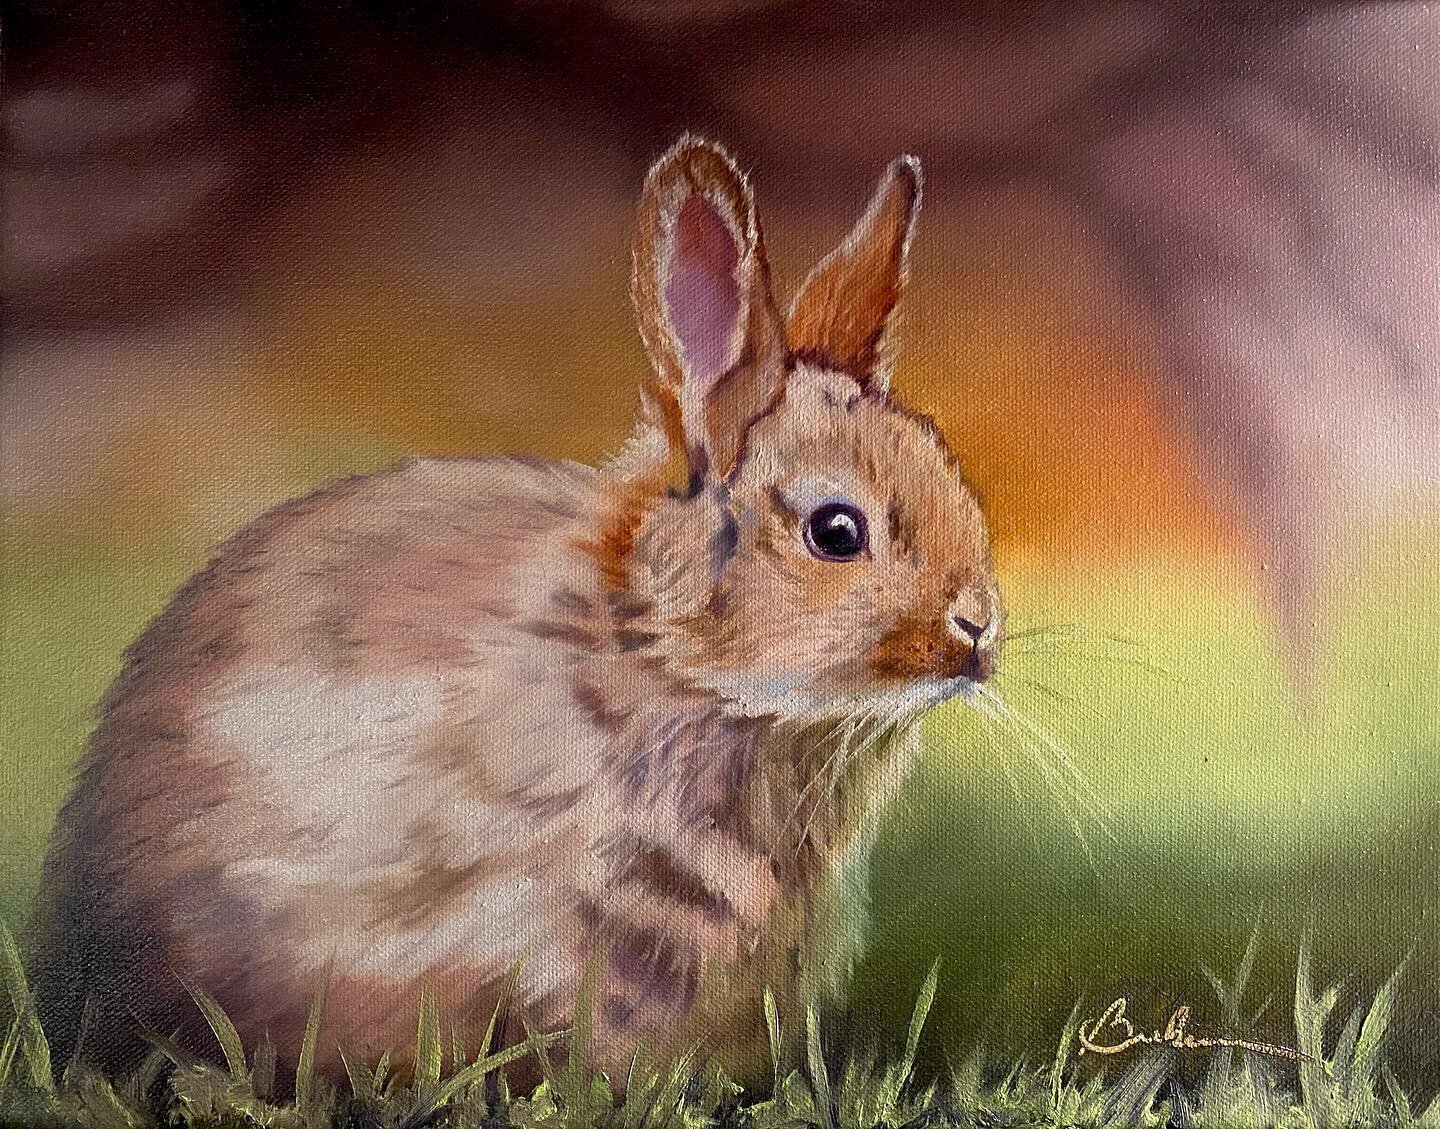 Some people feel a spiritual connection when a cardinal is present, or butterflies. I painted this gift for someone who feels that with bunny rabbits. Merry Christmas D! 🐇🎨